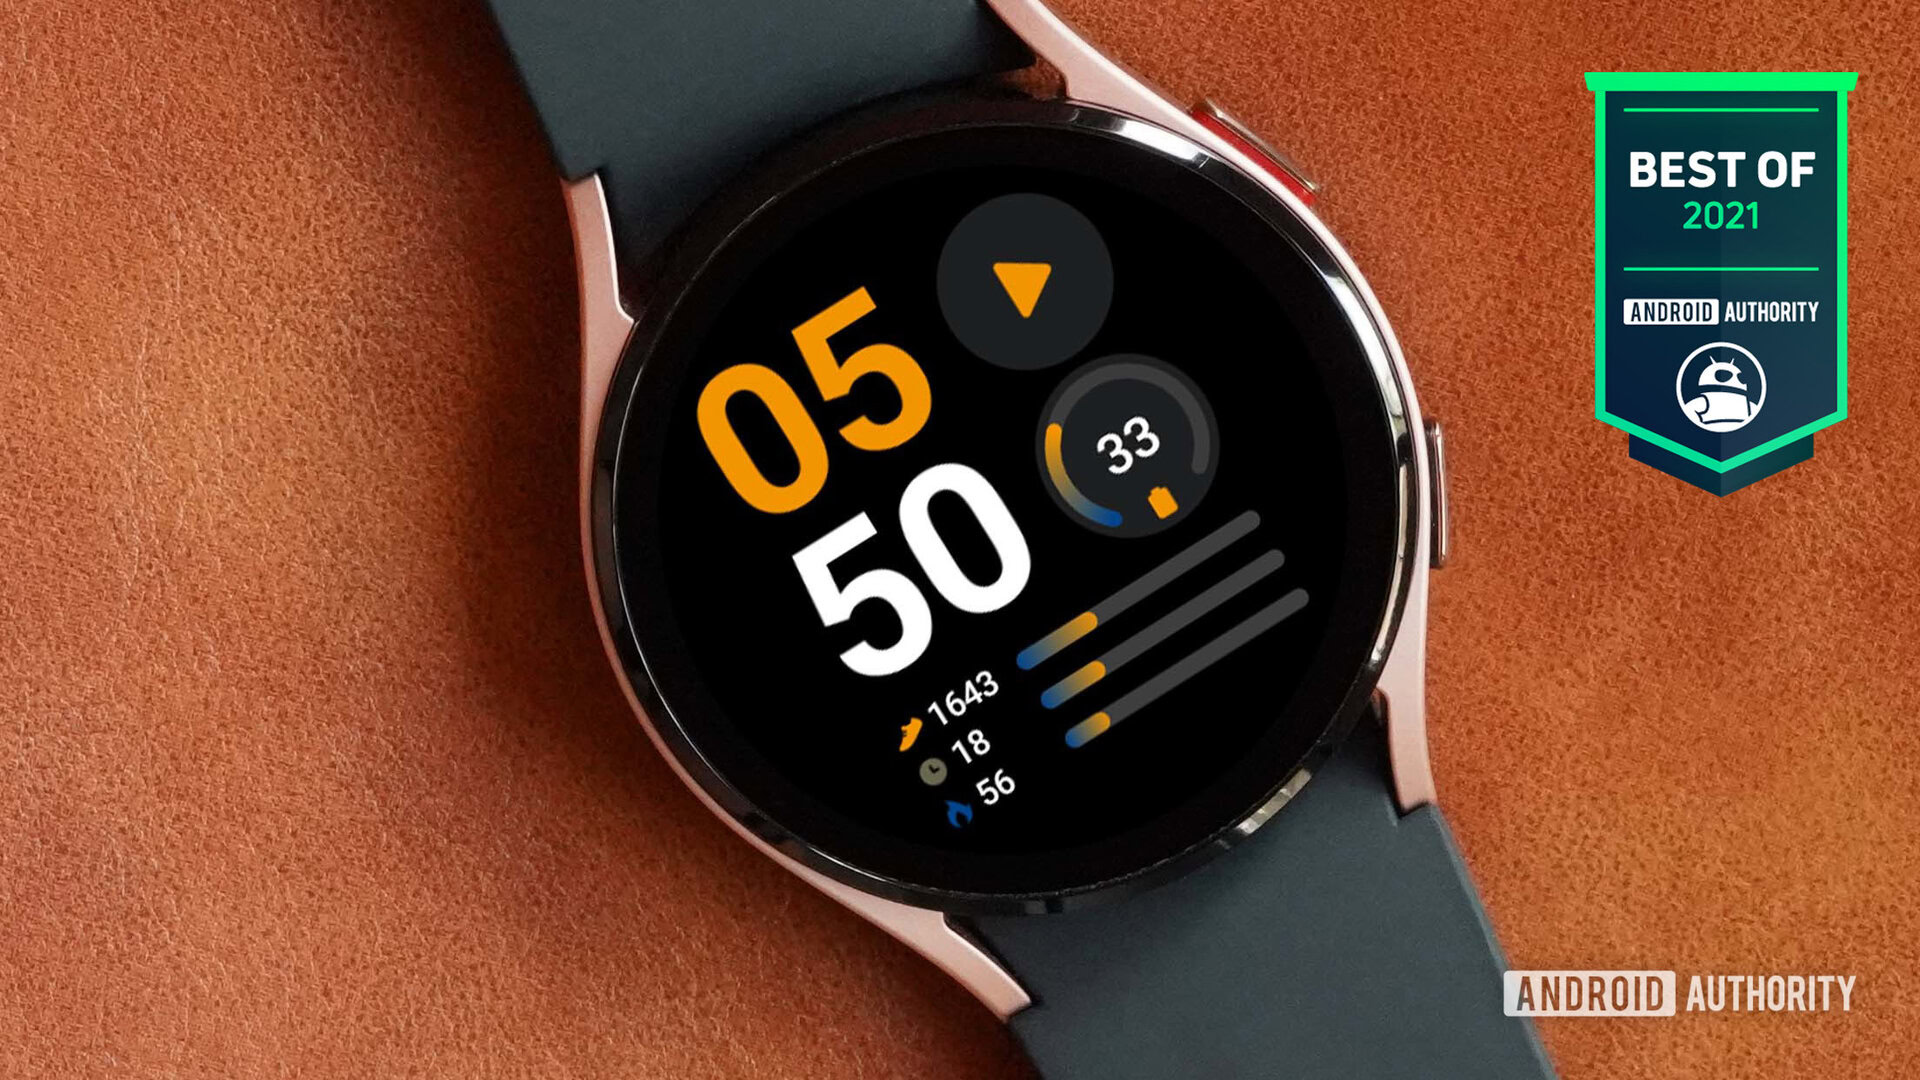 Samsung Galaxy Watch 4 Android Authority Best of 2021 badge